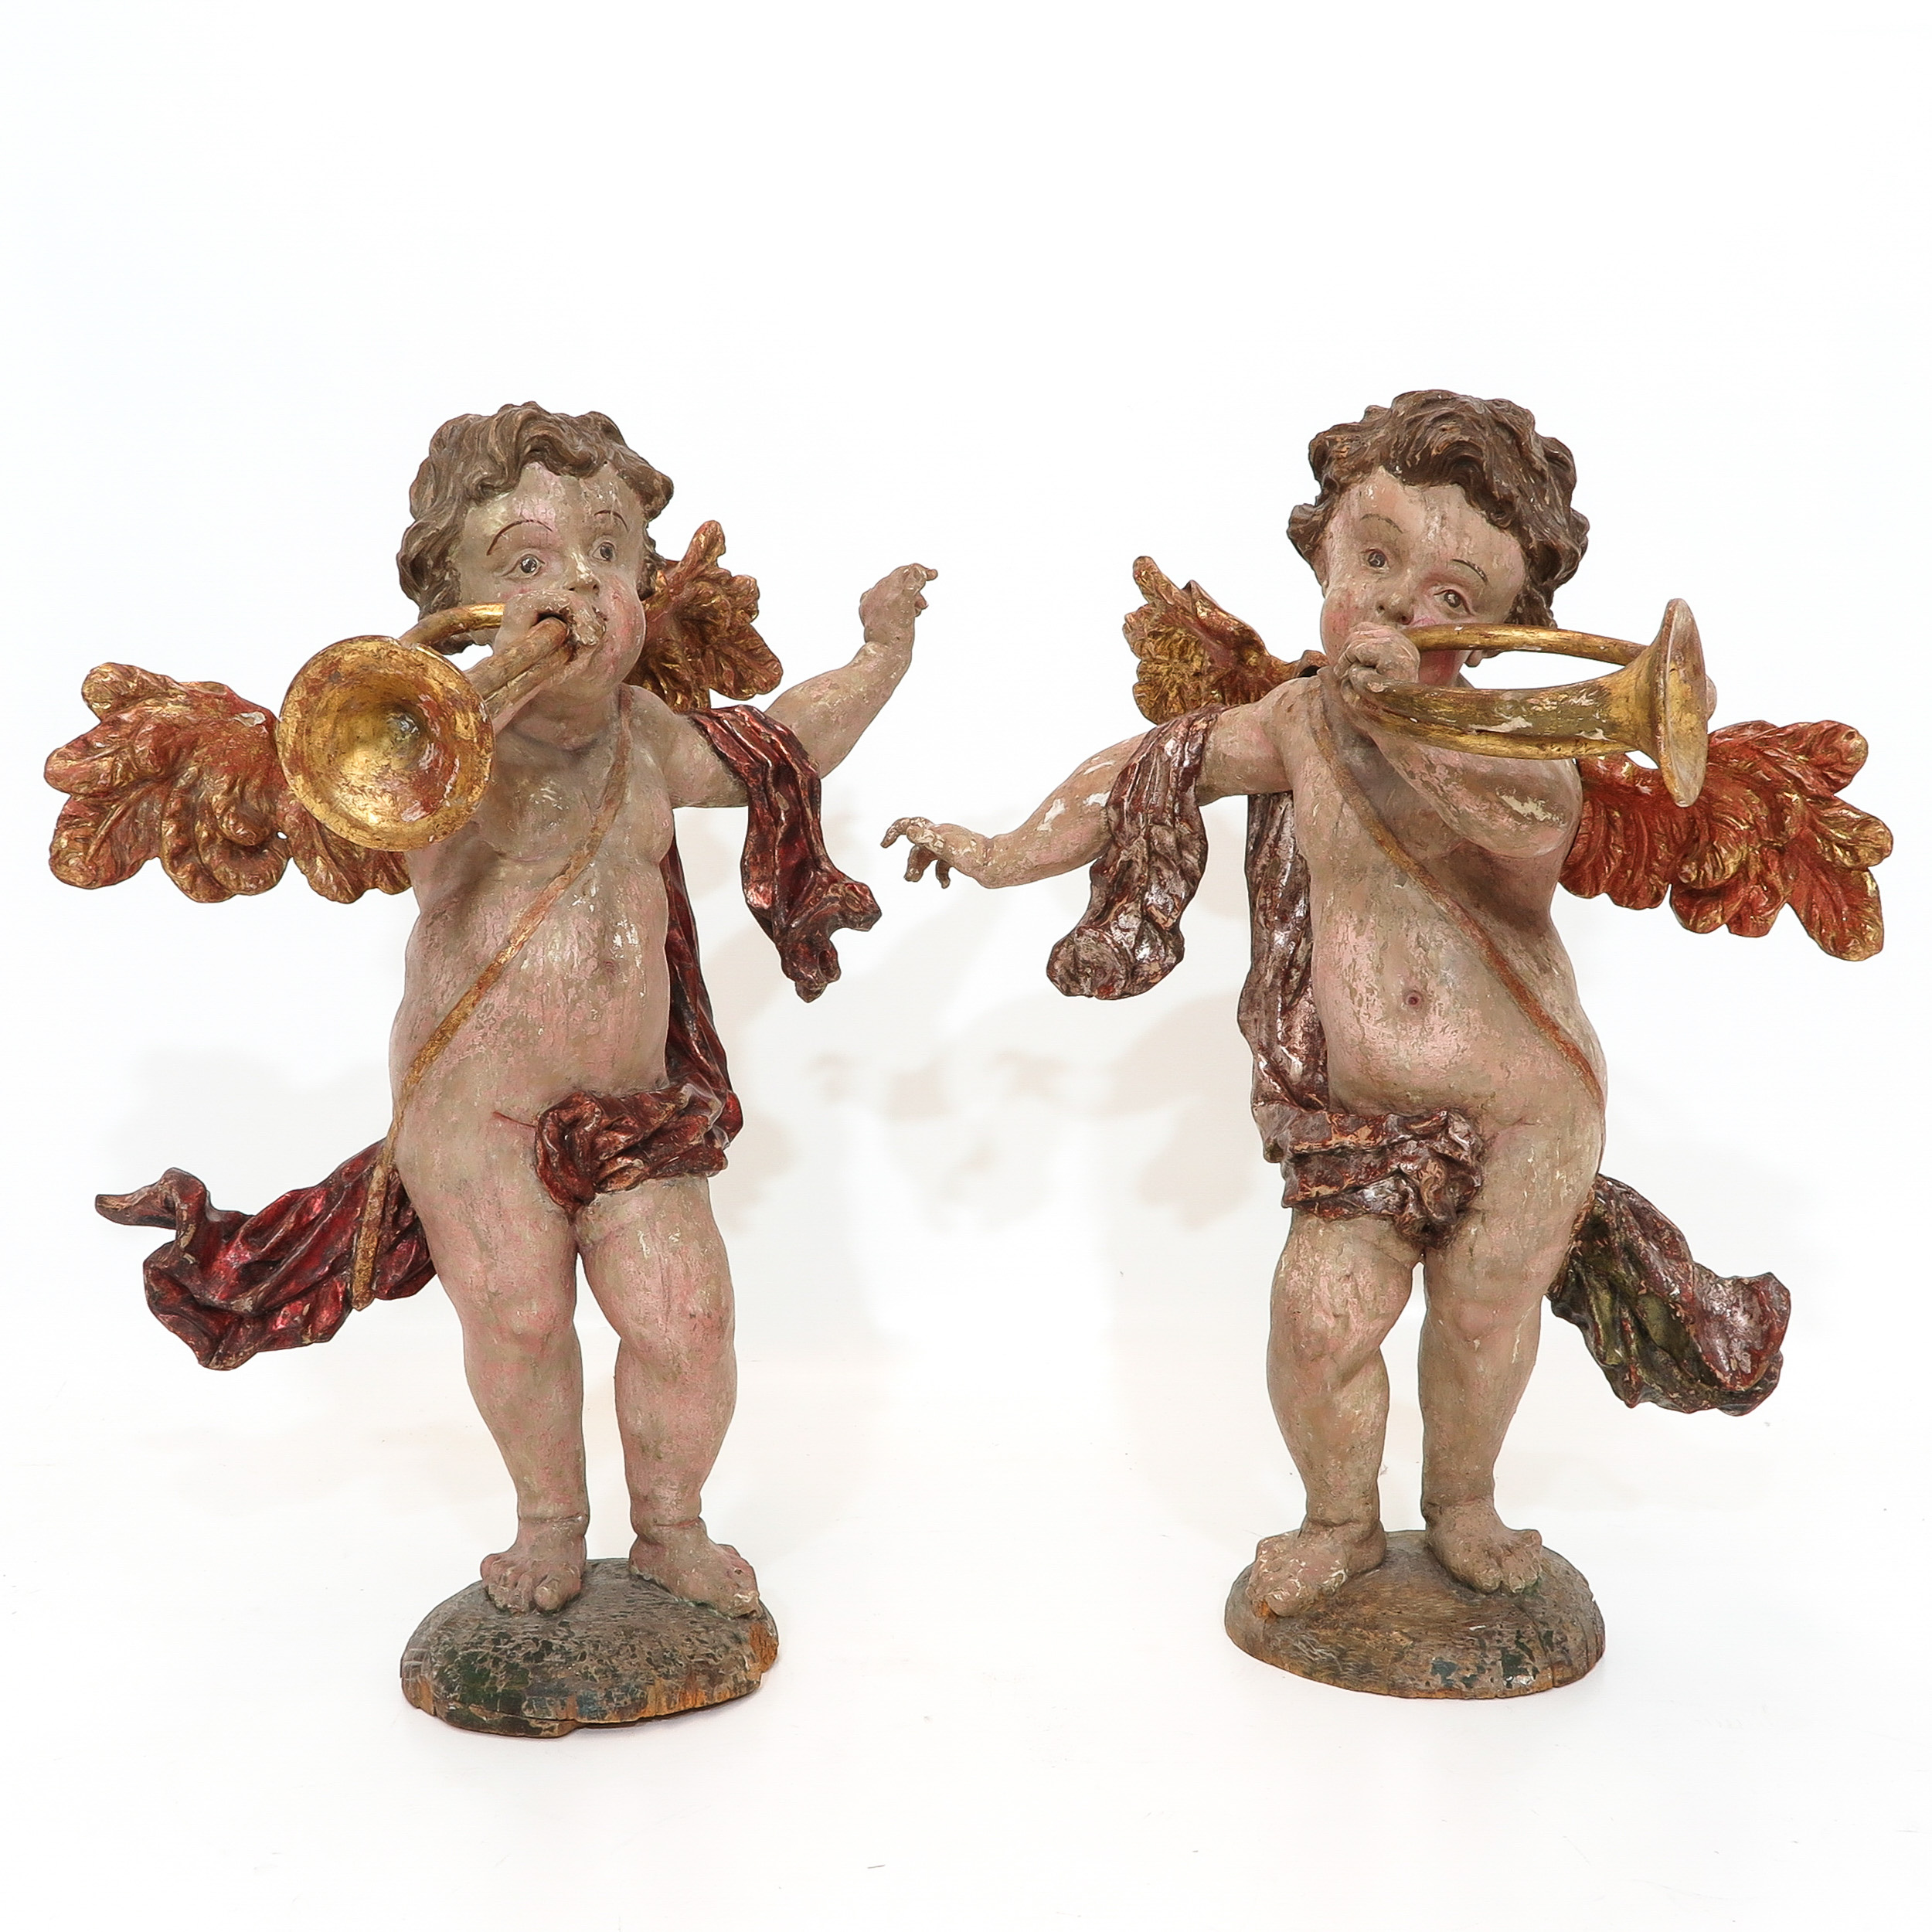 A Very Rare Pair of 18th Century Baroque Angels